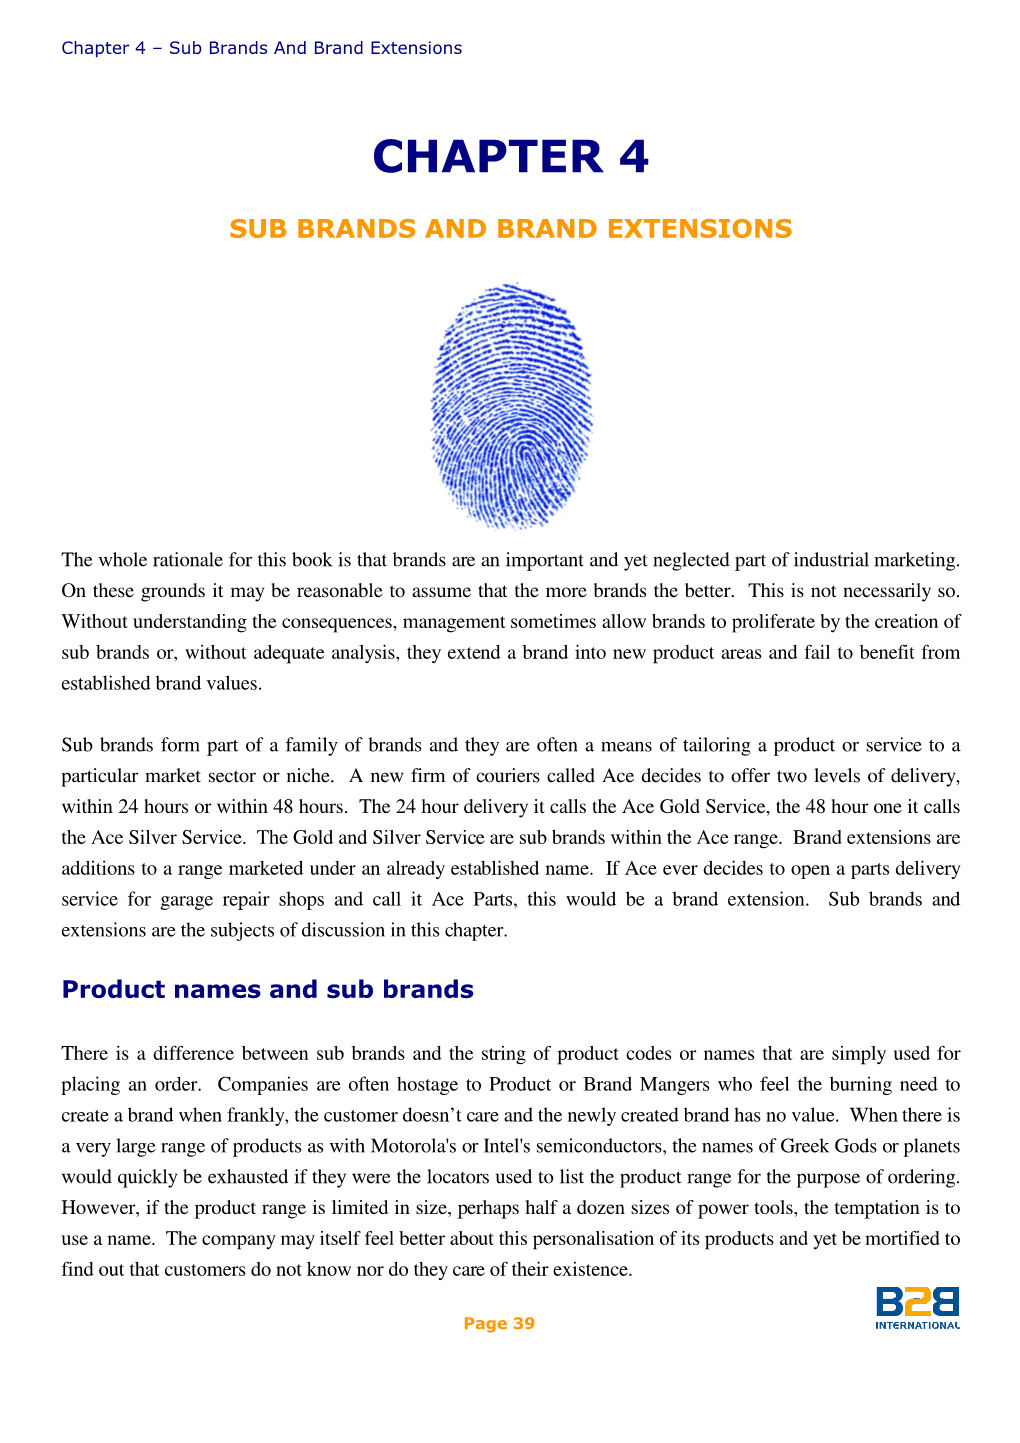 Chapter 4 – Sub Brands and Brand Extensions